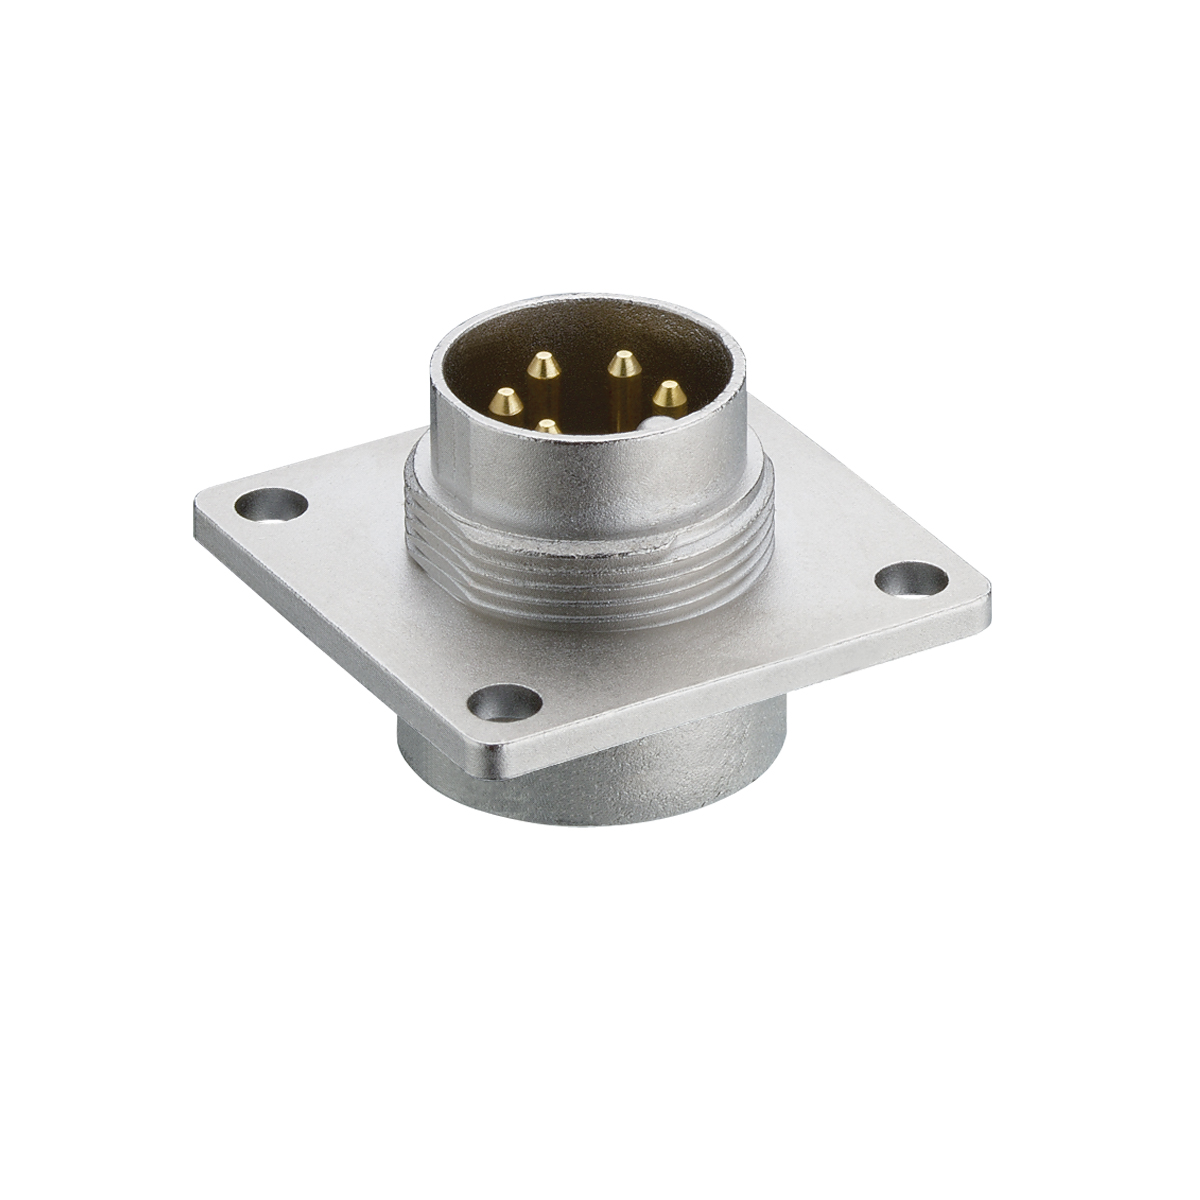 Lumberg: 318 (Series 03 | Circular connectors with threaded joint M16 acc. to IEC 61076-2-106, IP40/IP68)